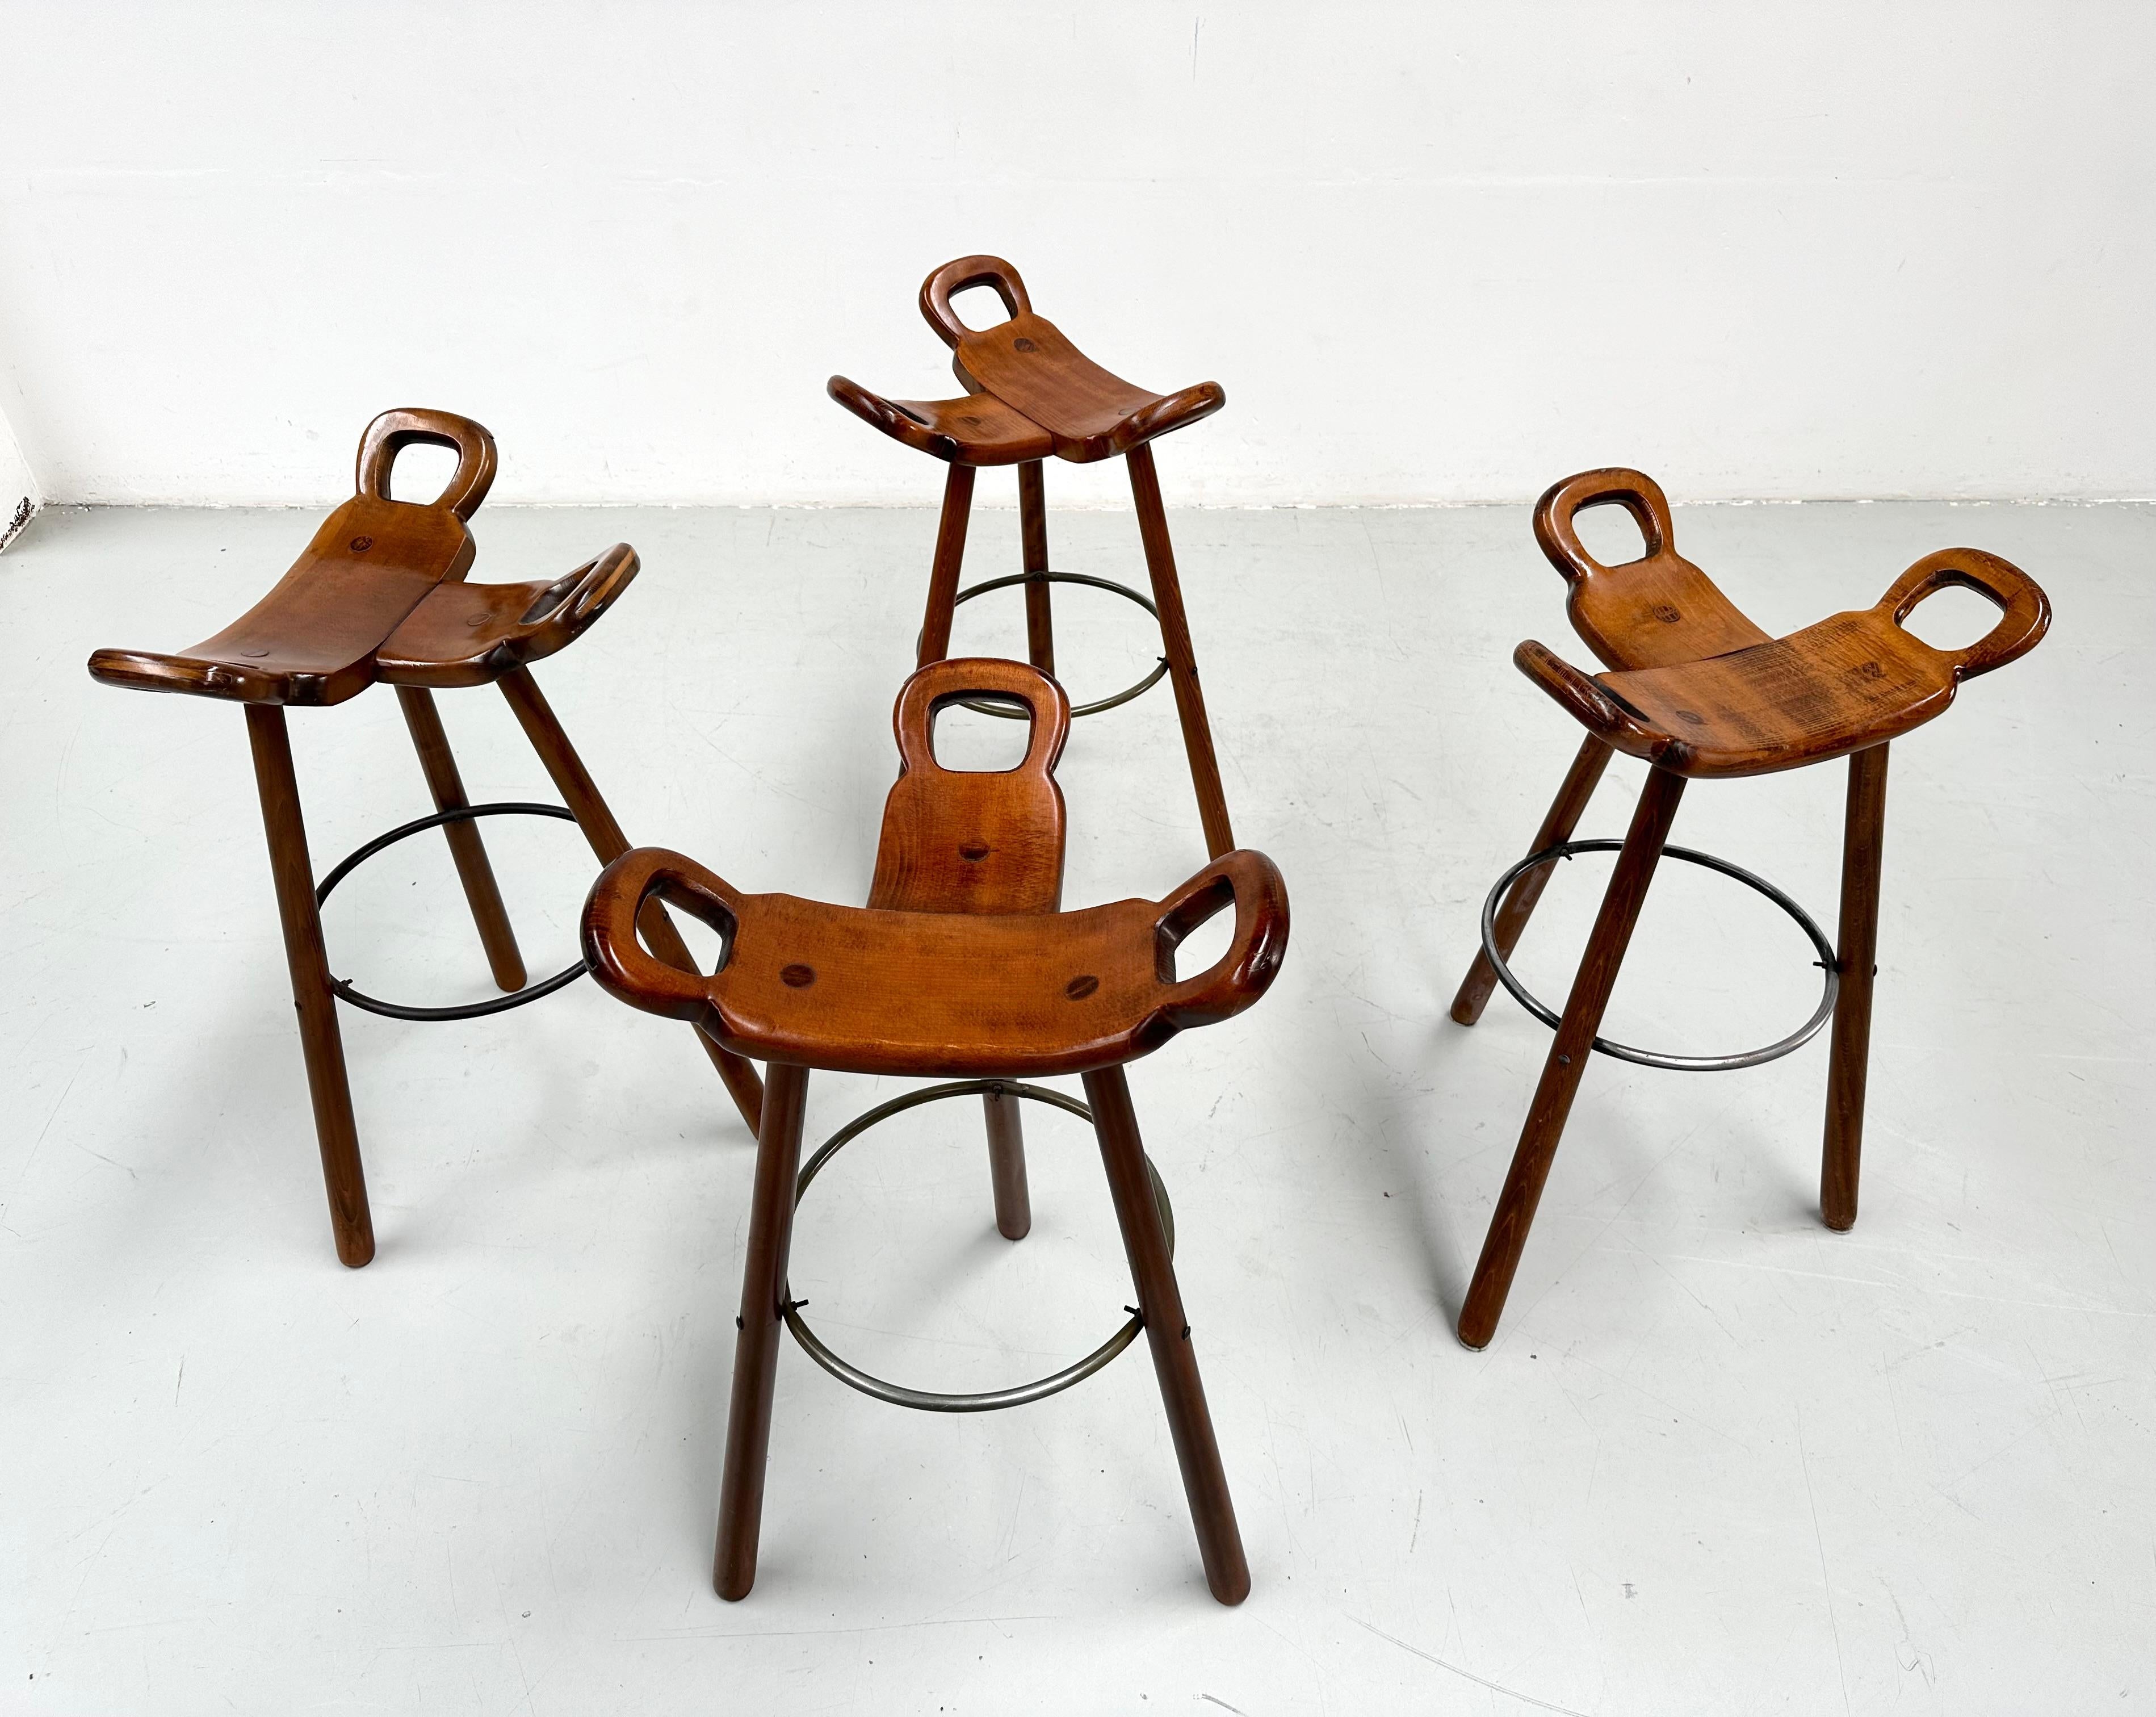 Set of 4 Marbella Brutalist Stools by Sergio Rodrigues for Confonorm 1970s. For Sale 12